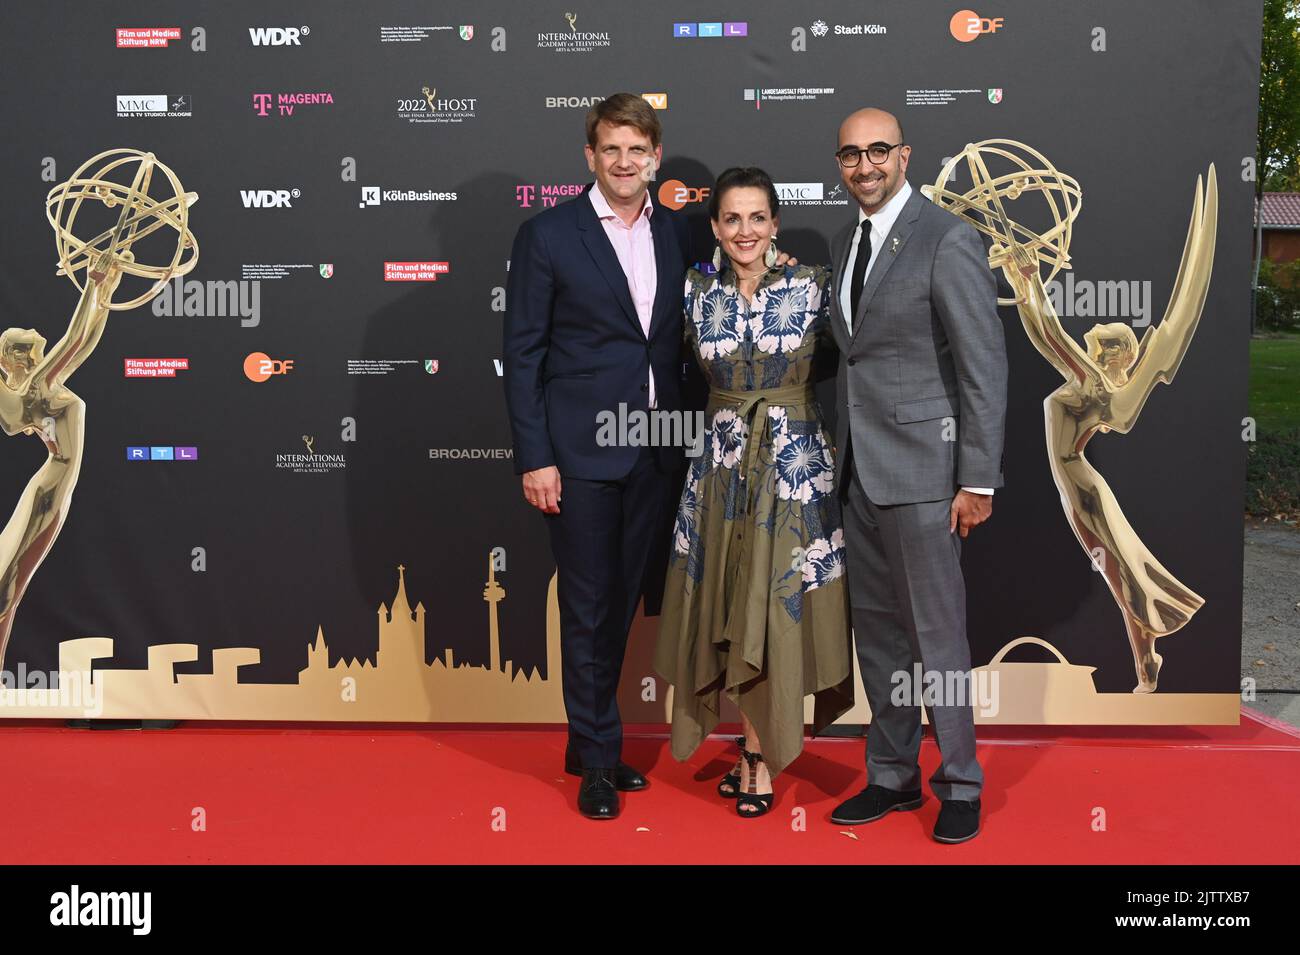 Cologne, Germany. 31st Aug, 2022. Producer Leopold Hoesch (l-r), actress Nicole Ansari-Cox and Emmy Jury Chief Nathaniel Brendel arrive at the evening event during the jury session for the international Emmy Awards 2022 - Semi Final round of Judging of the international Emmy Awards at Schloss Arff. Credit: Horst Galuschka/dpa/Alamy Live News Stock Photo